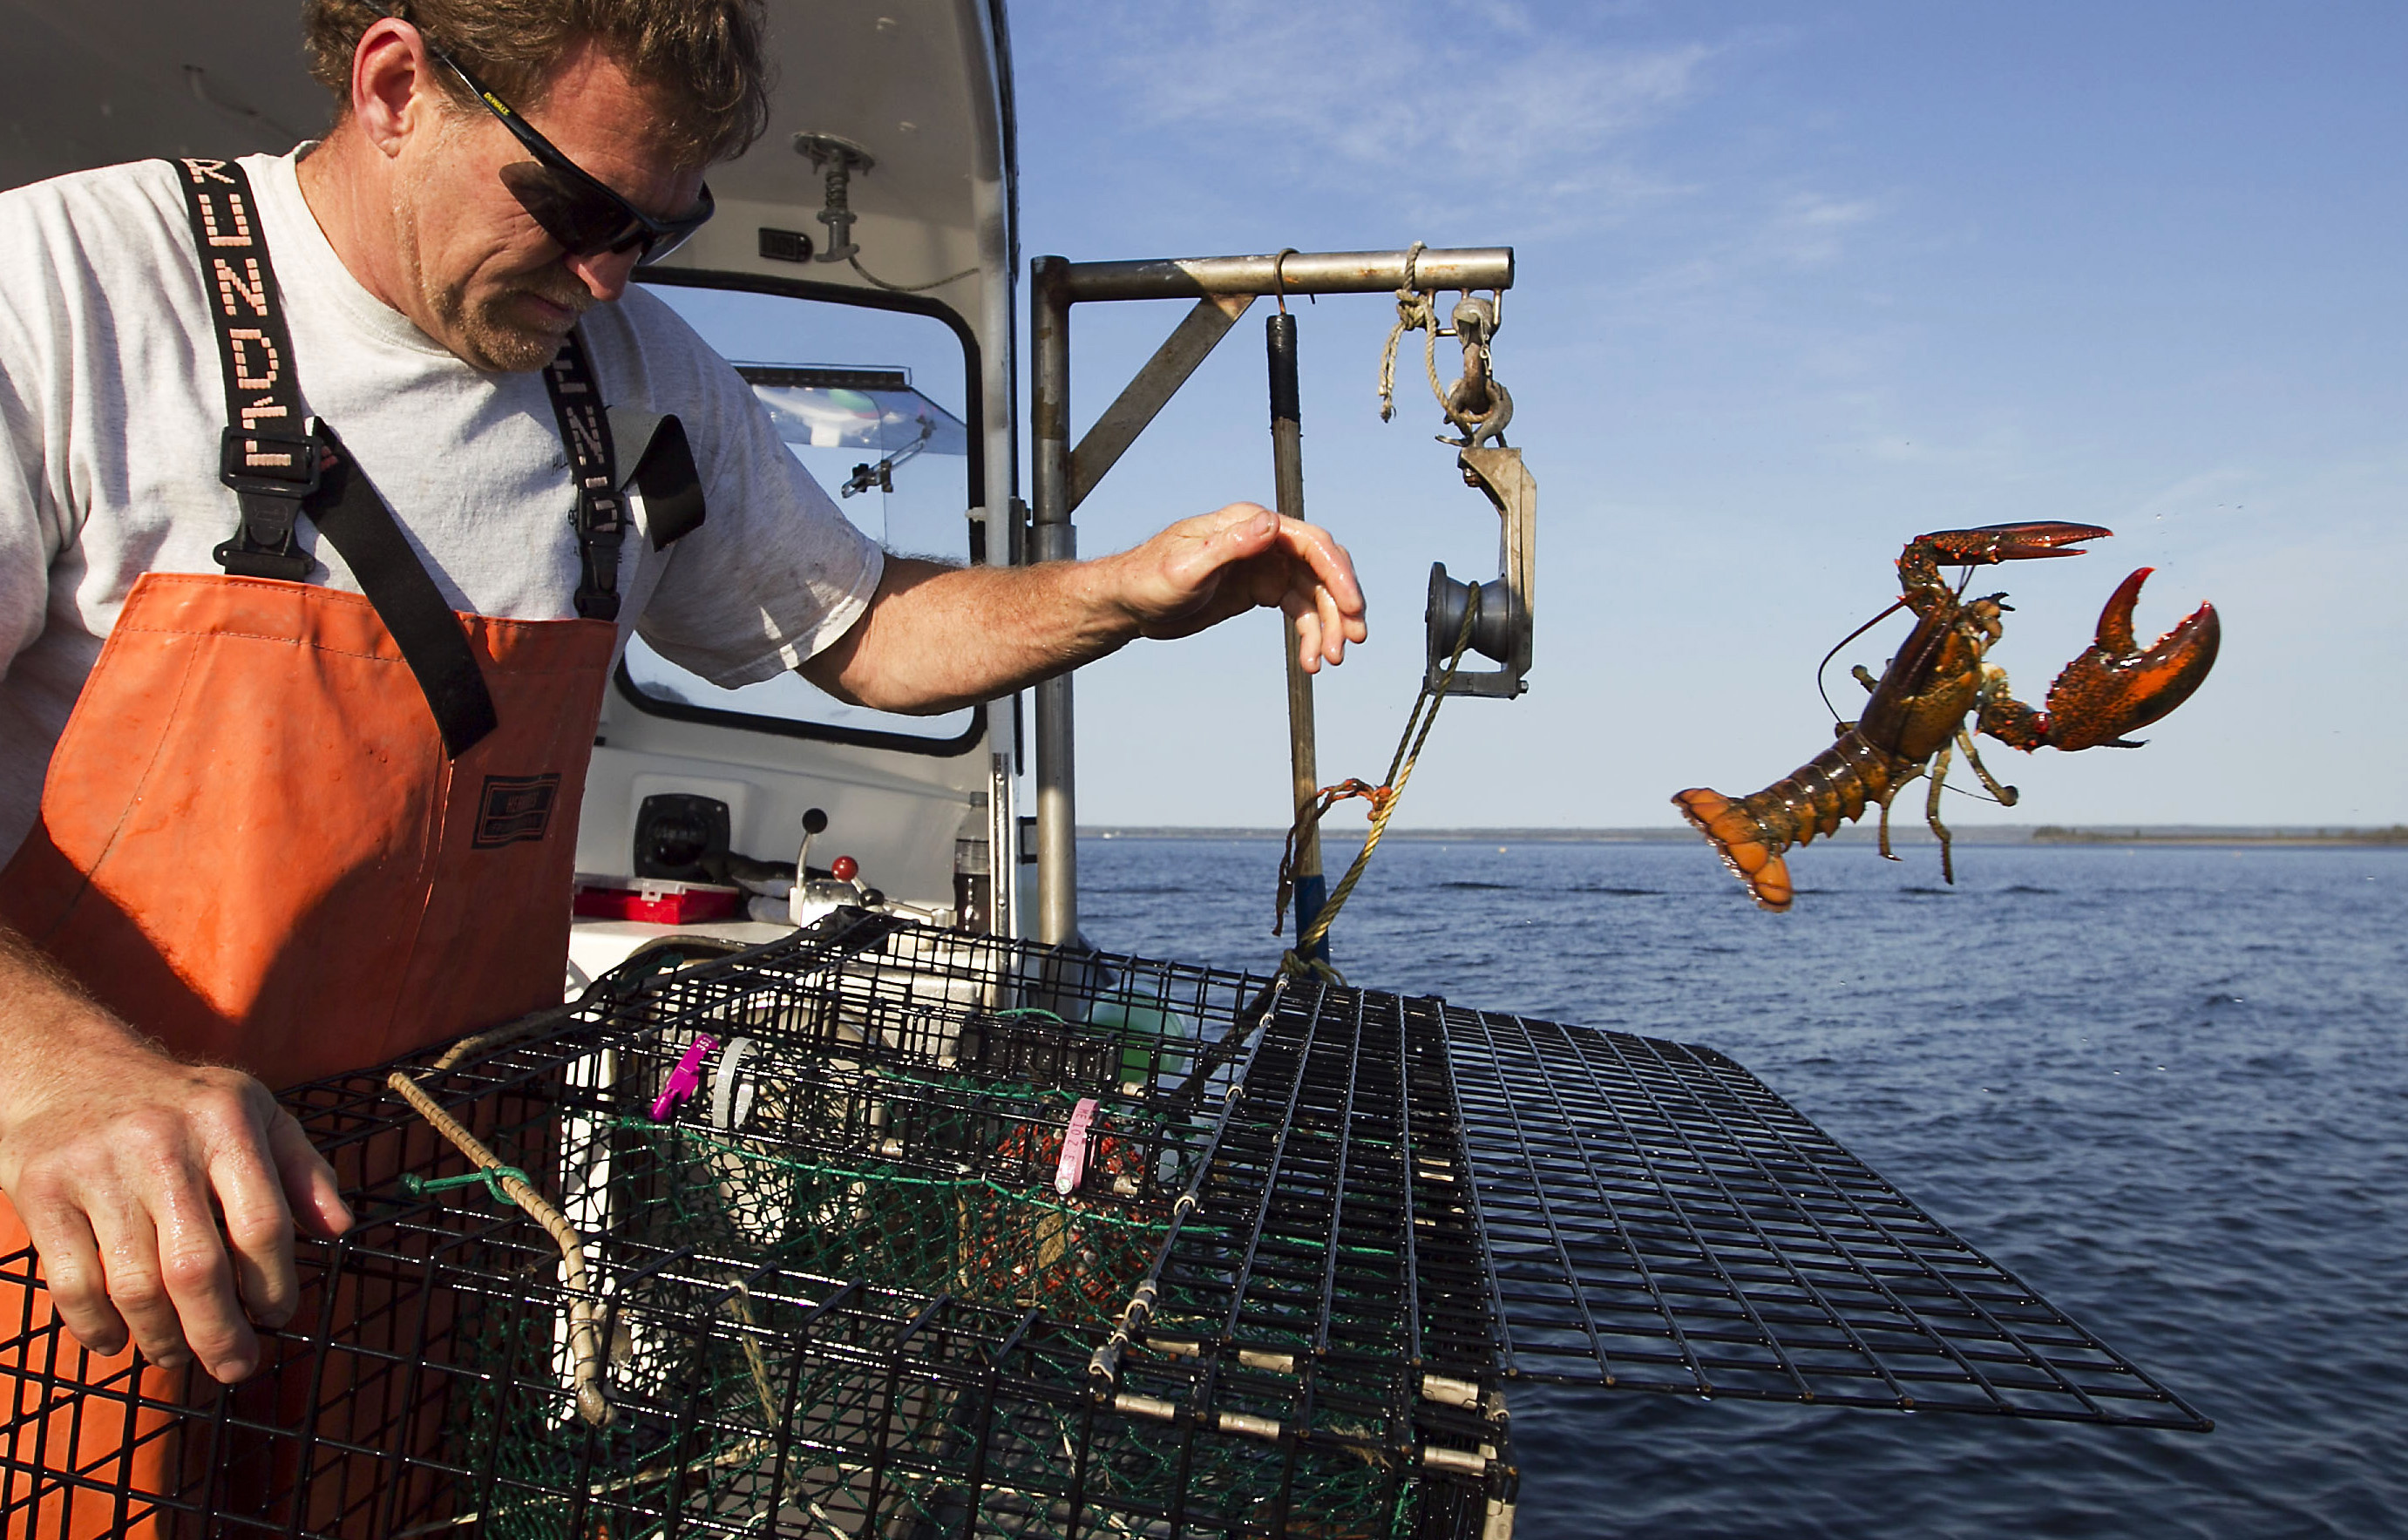 Climate change threatens the livelihoods of Maine's lobstermen